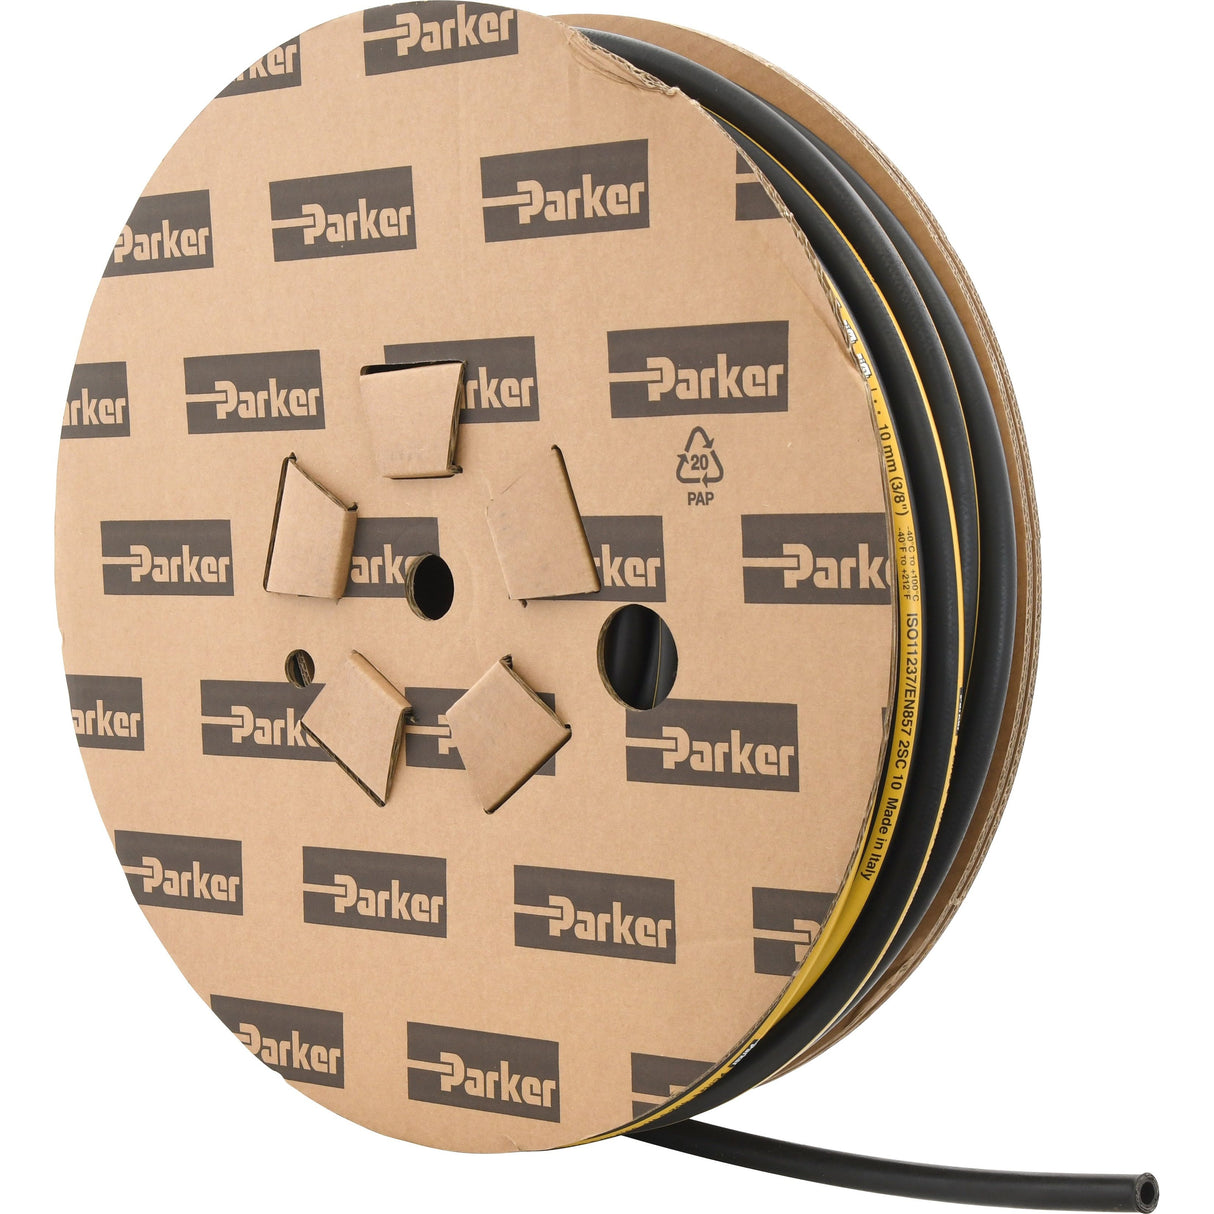 Parker Hydraulic Hose - 3/8'' 2SC 2 Wire Compact (Reel)
 - S.1080206 - Farming Parts